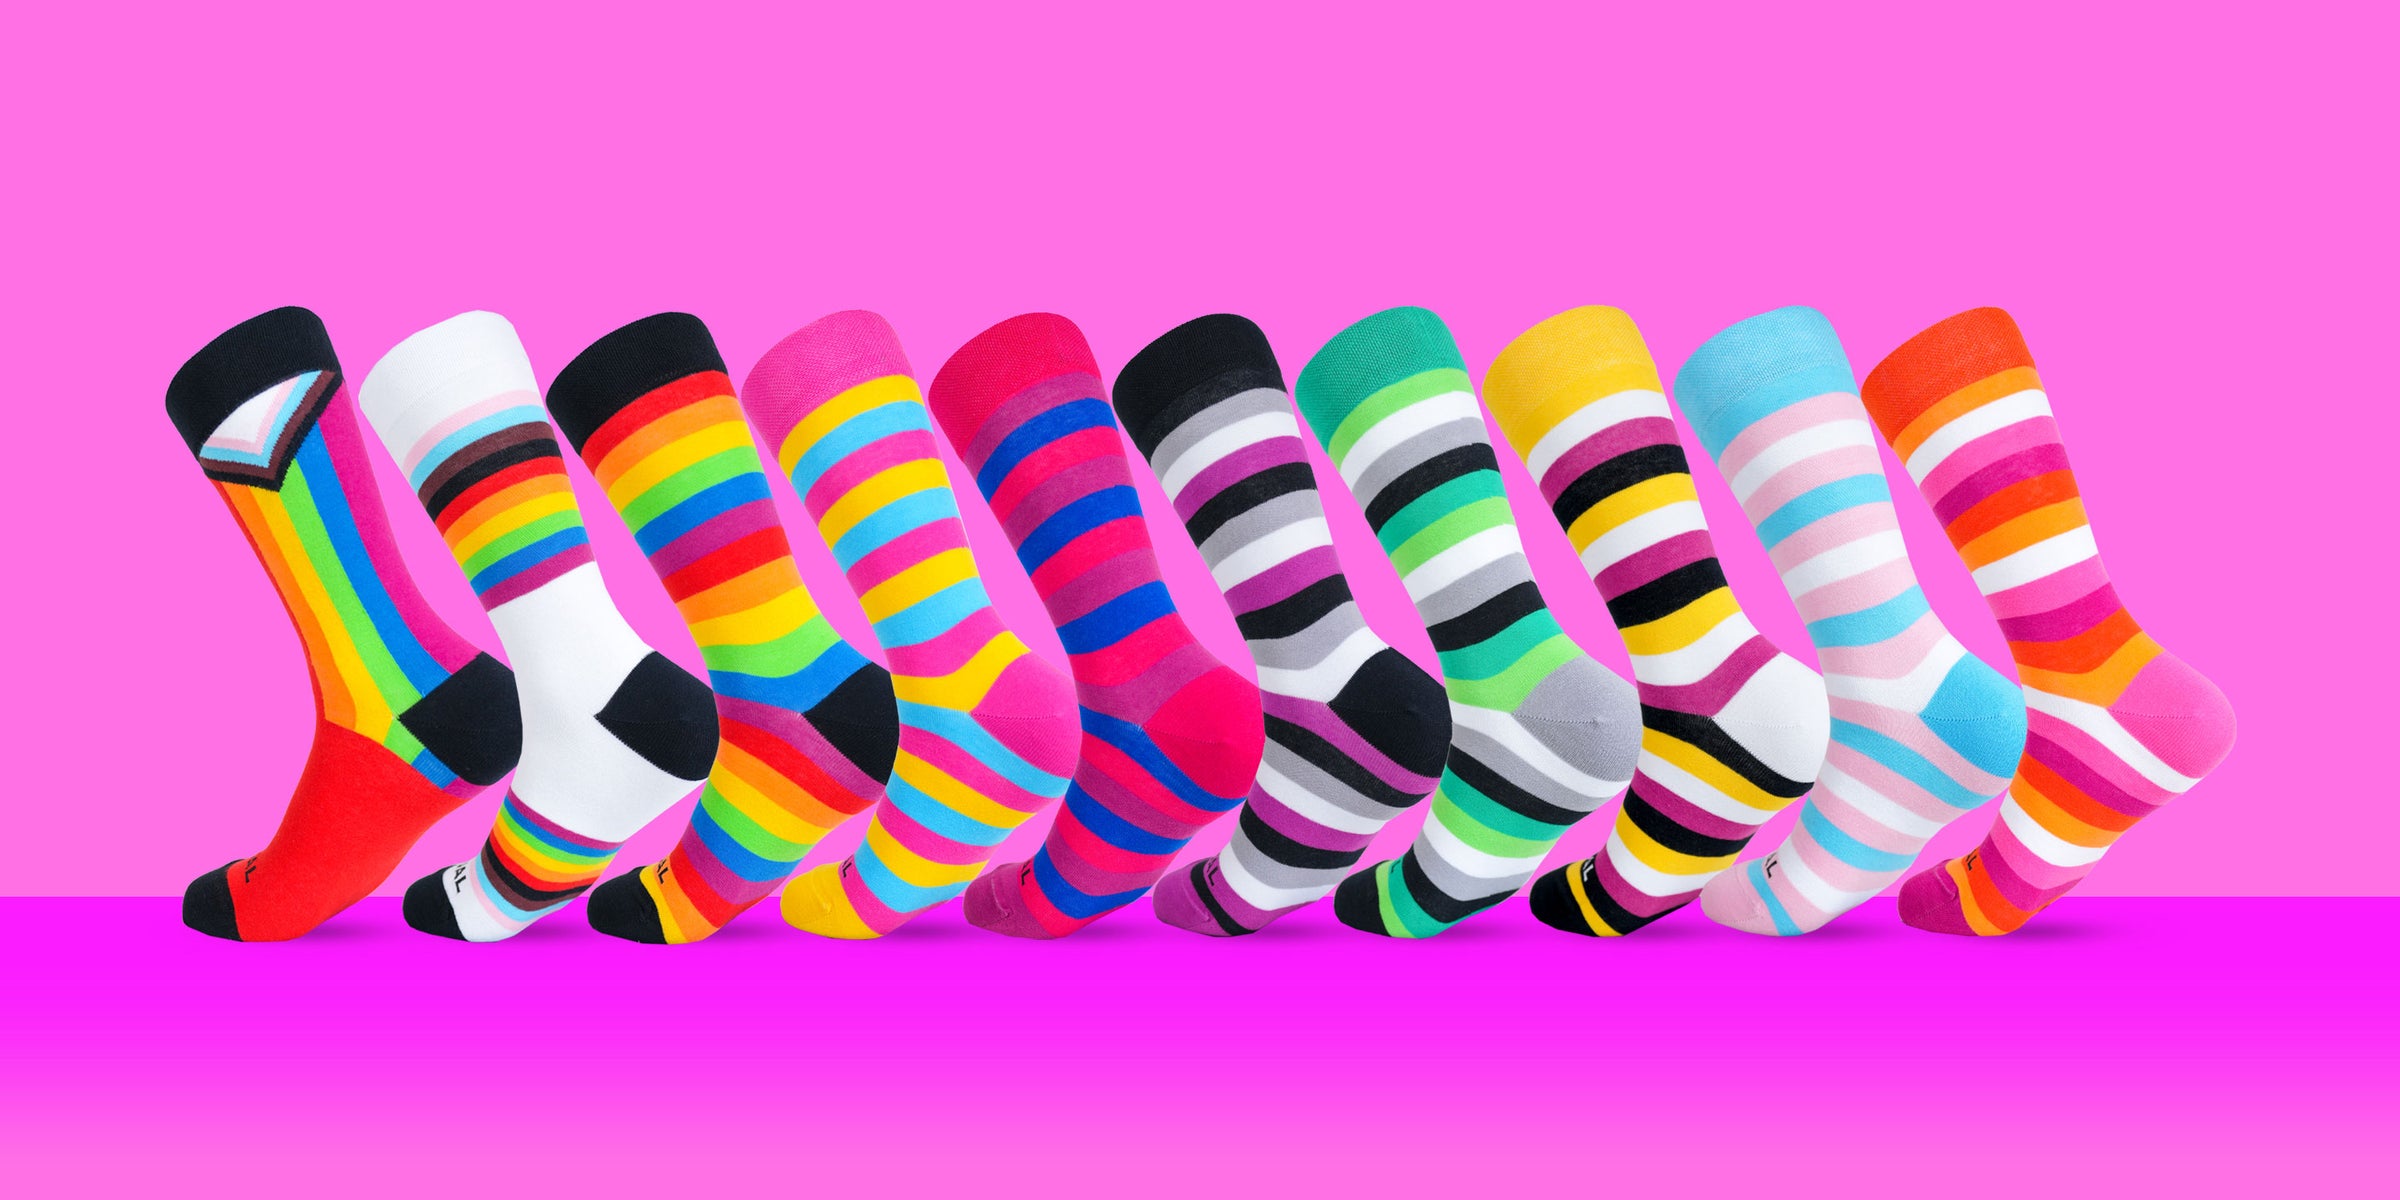 LGBTS Socks range from Prequal on a pink background